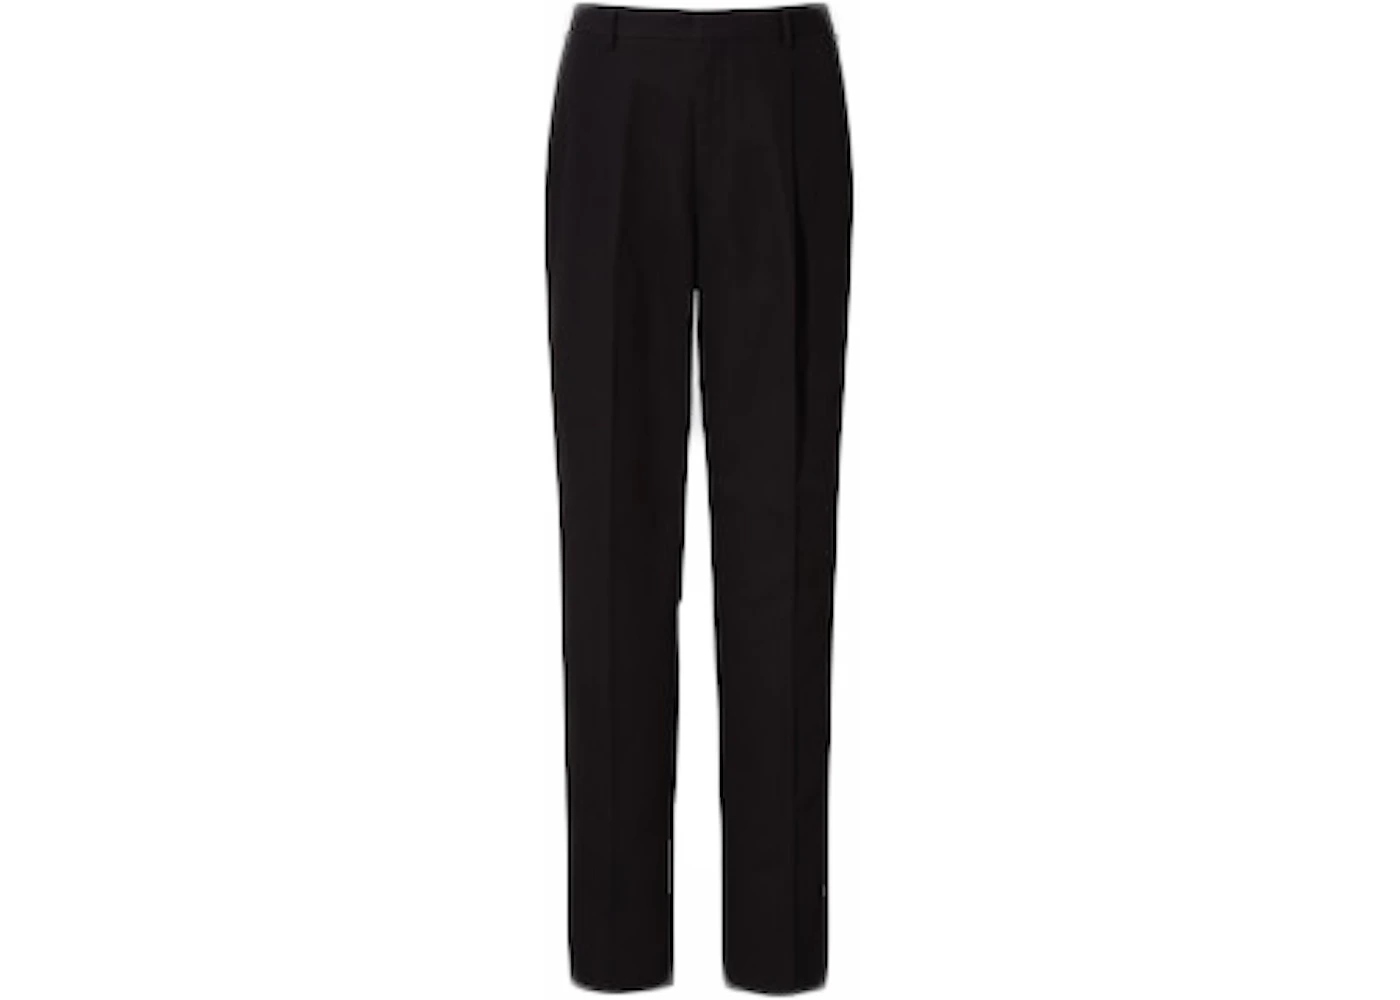 Uniqlo x Jil Sander Wide Fit Relaxed Tapered Trousers Black Men's ...